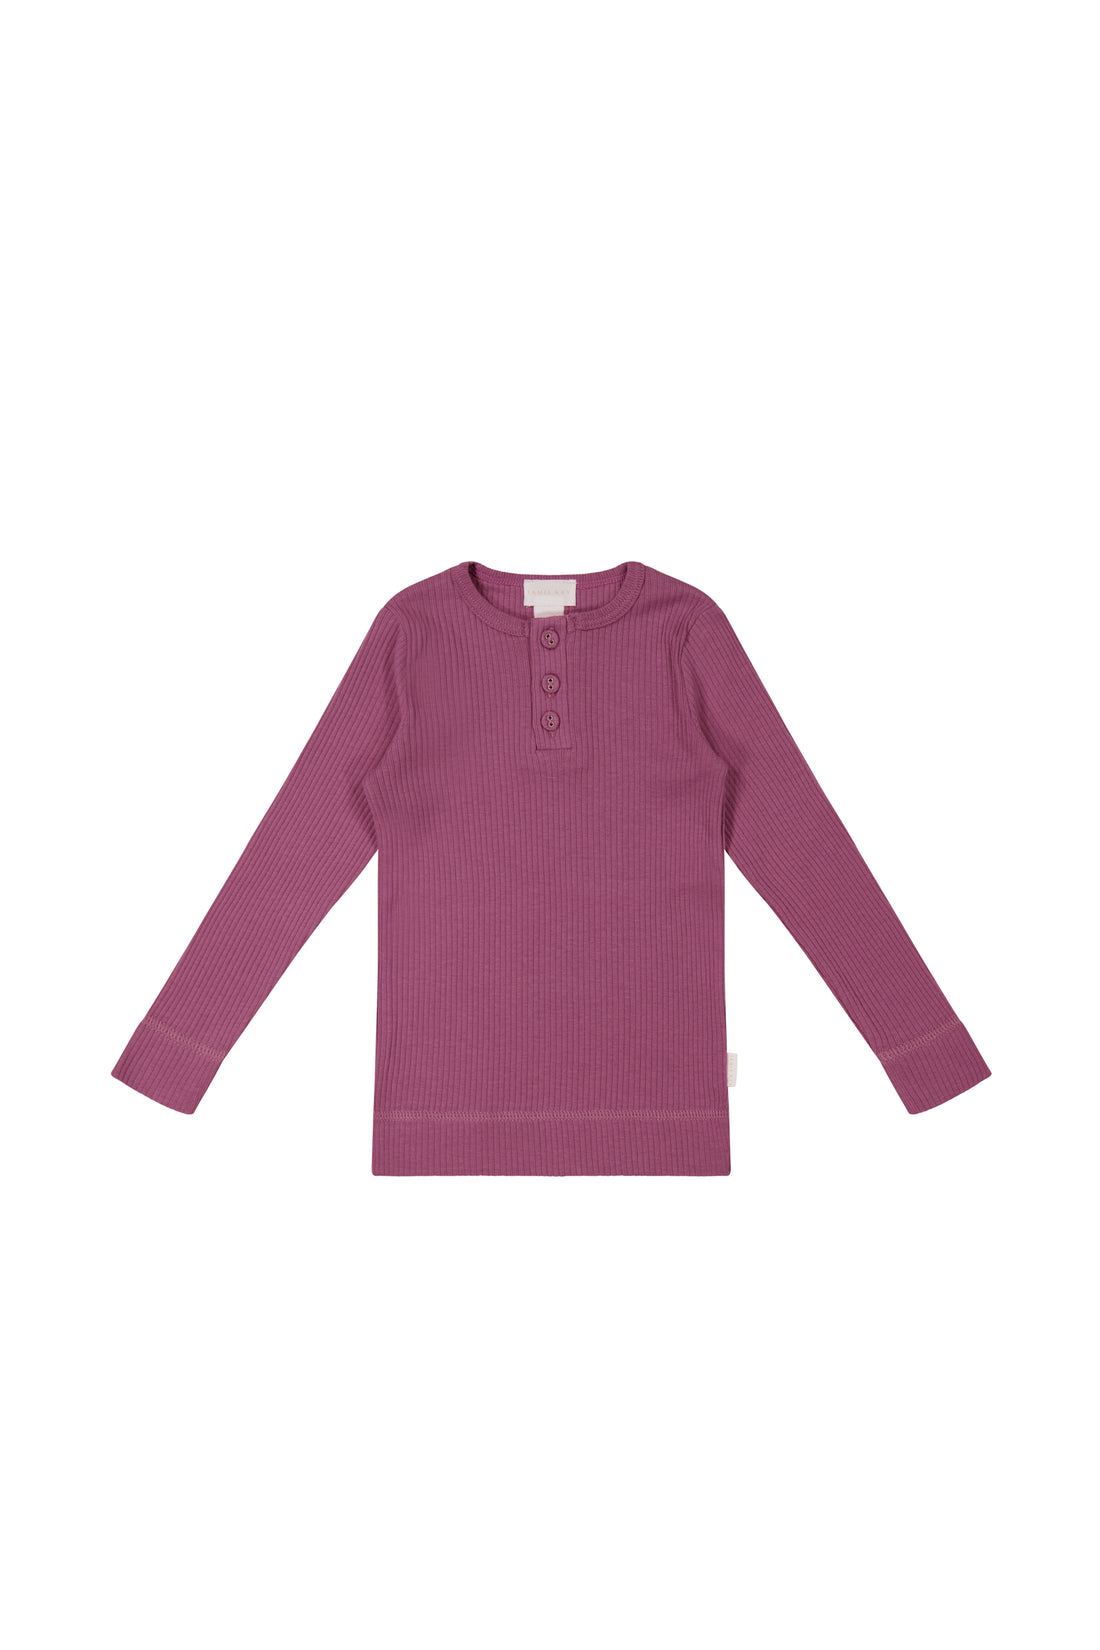 Organic Cotton Modal Long Sleeve Henley - Cranberry Childrens Top from Jamie Kay NZ